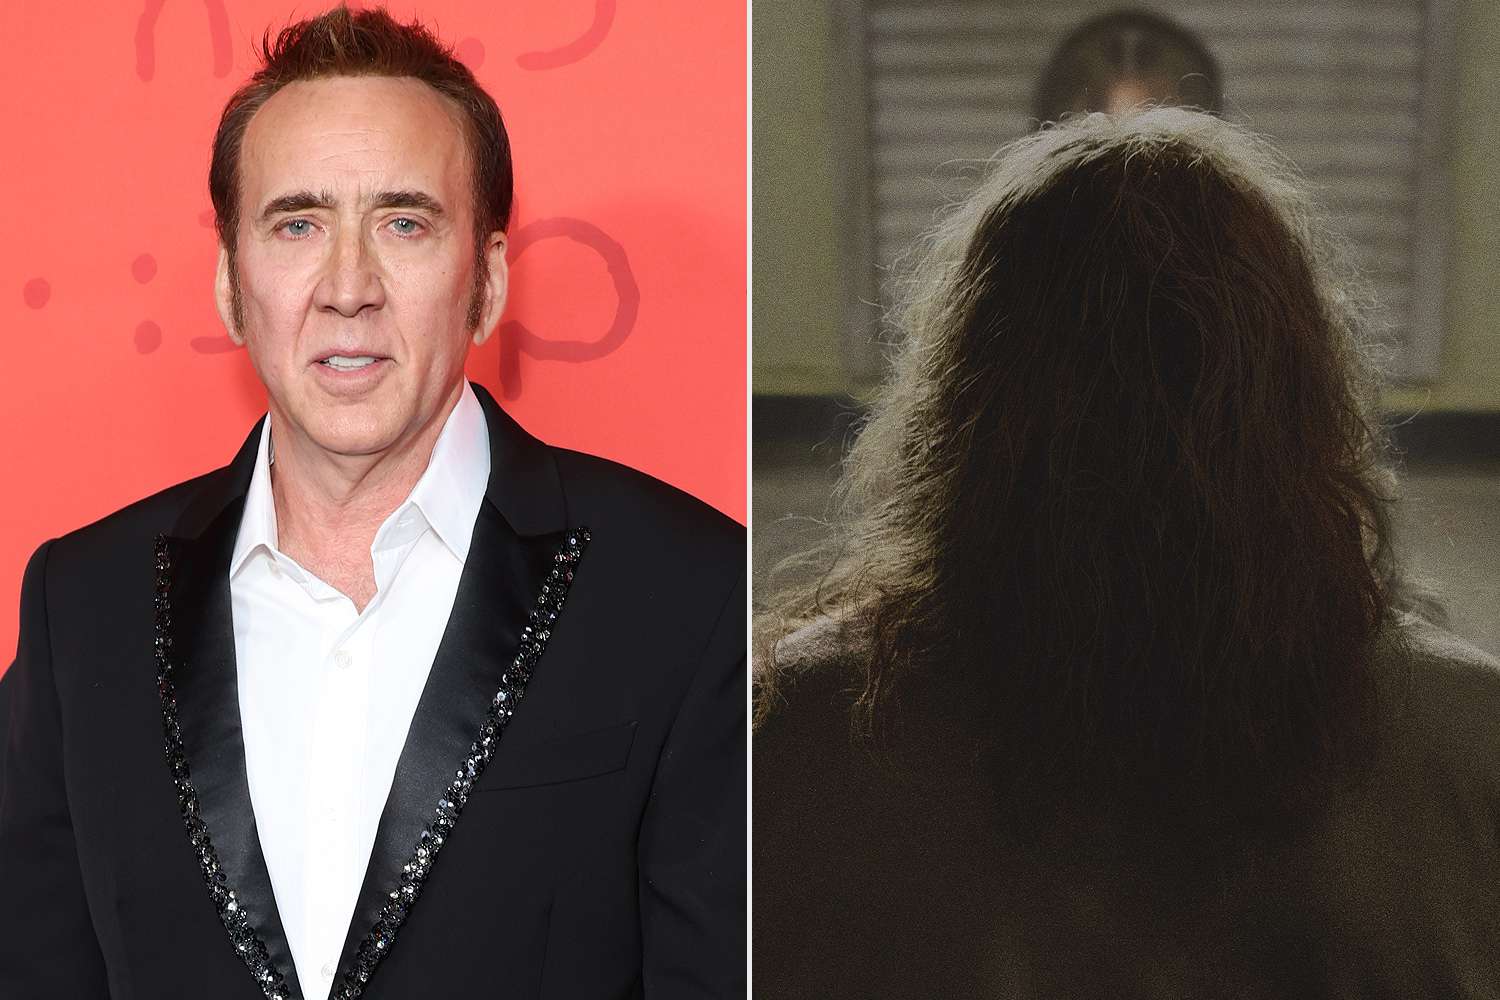 Longlegs Director Breaks Down Nicolas Cage's Terrifying Transformation: He Performed a 'Disappearing Act' (Exclusive)